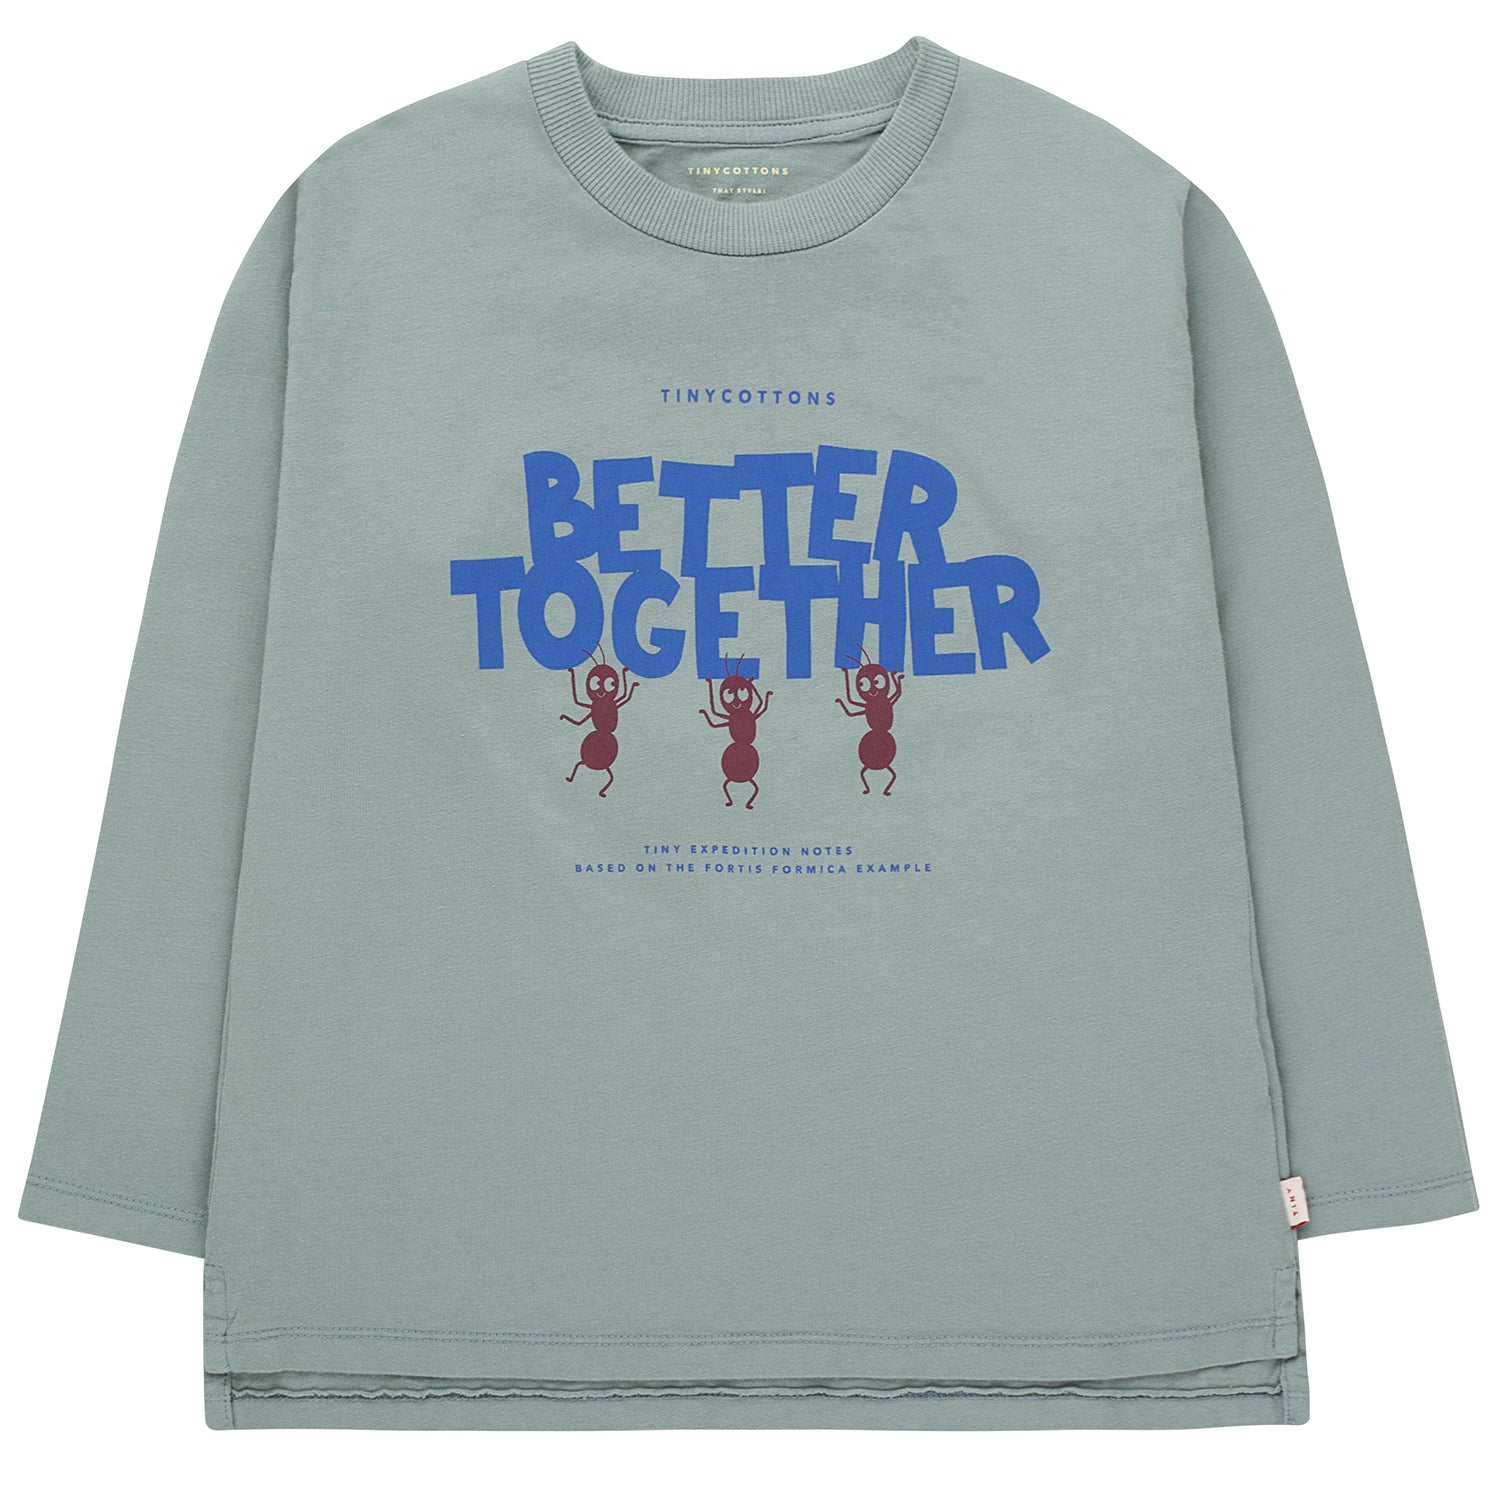 tiny cottons better together t-shirt